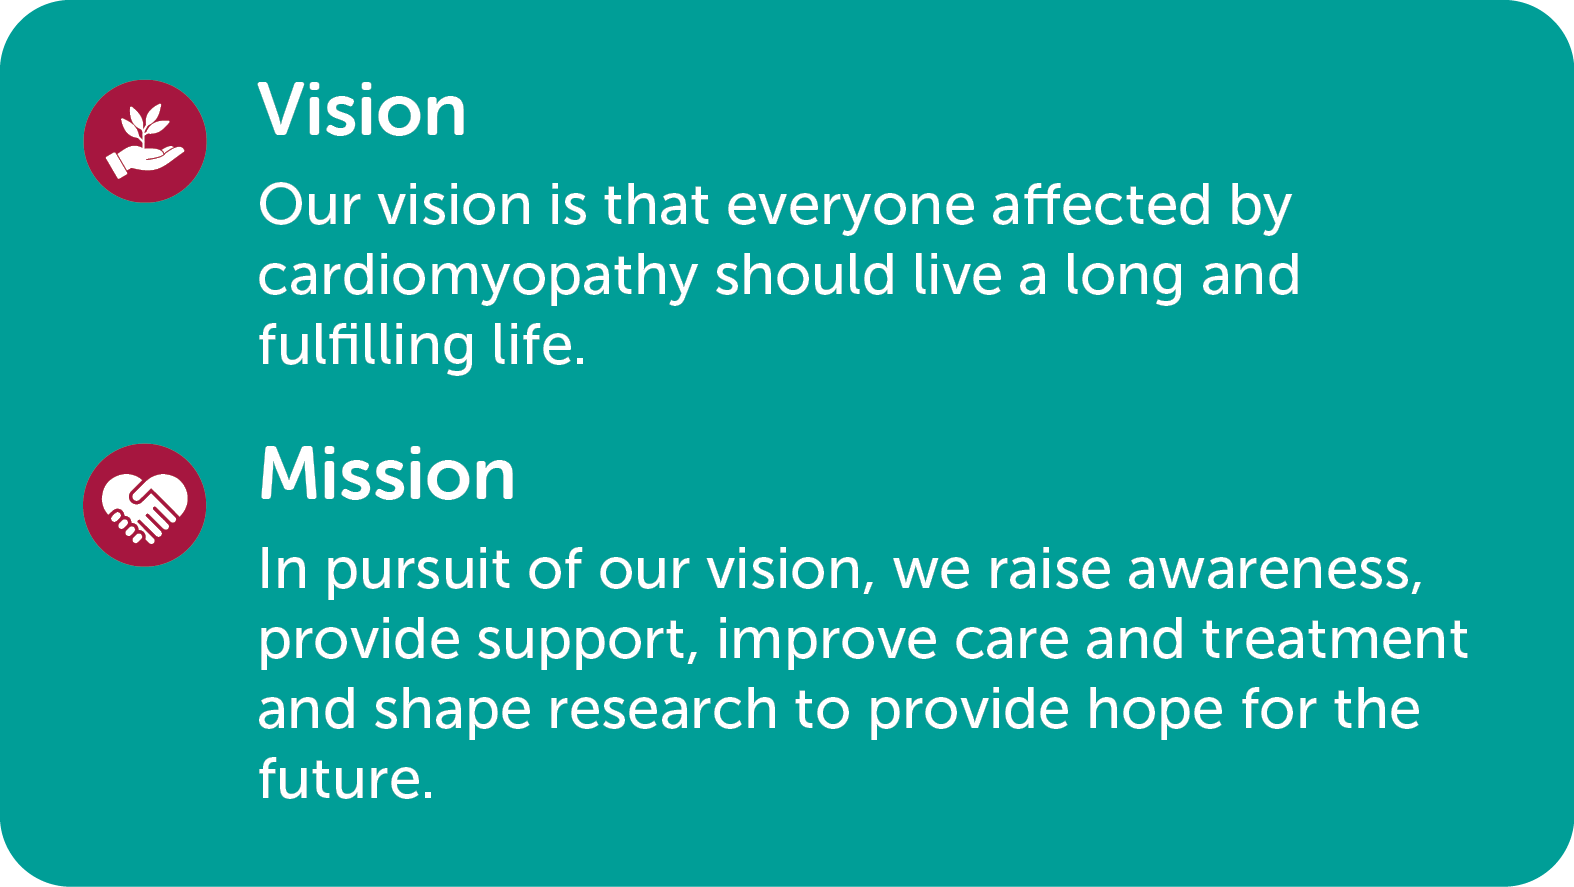 Our vision: Our vision is that everyone affected by cardiomyopathy should live a long and fulfilling life.  Our Mission: In pursuit of our vision, we raise awareness, provide support, improve care and treatment and shape research to provide hope for the future.